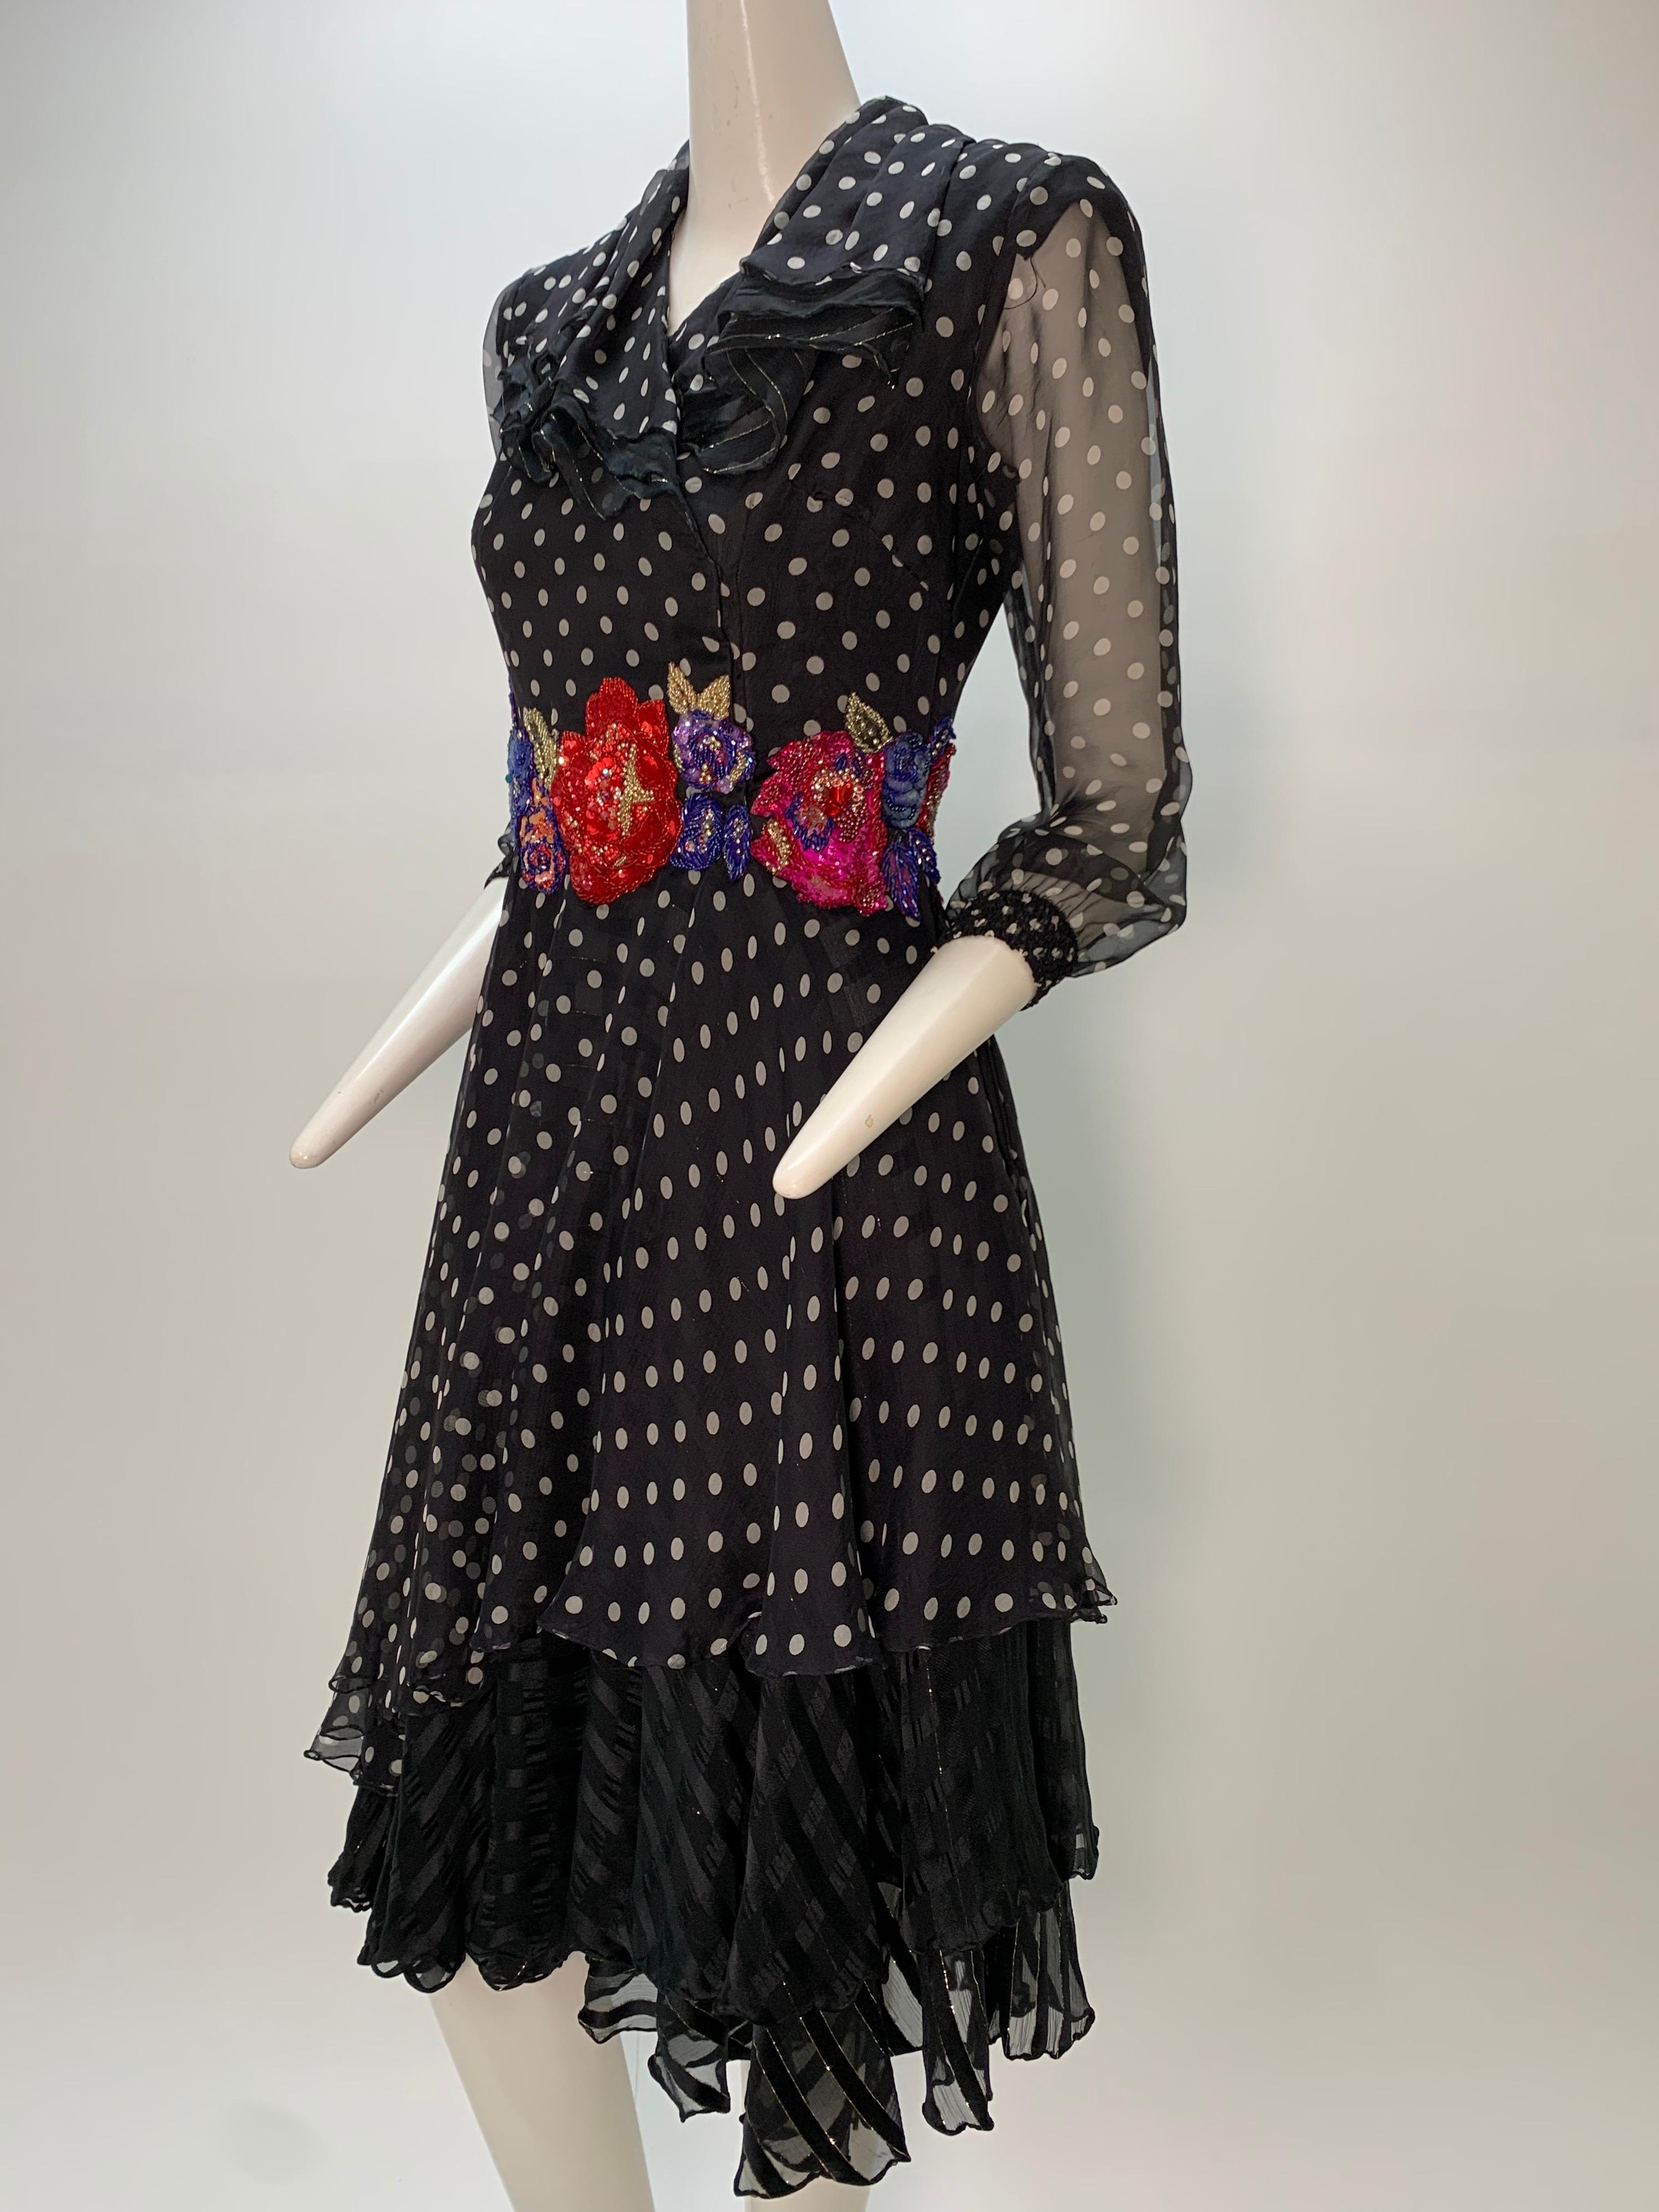 1980 Whimsical Silk Chiffon Polka Dot Dress W/ Colorful Beaded & Sequin Florals  3